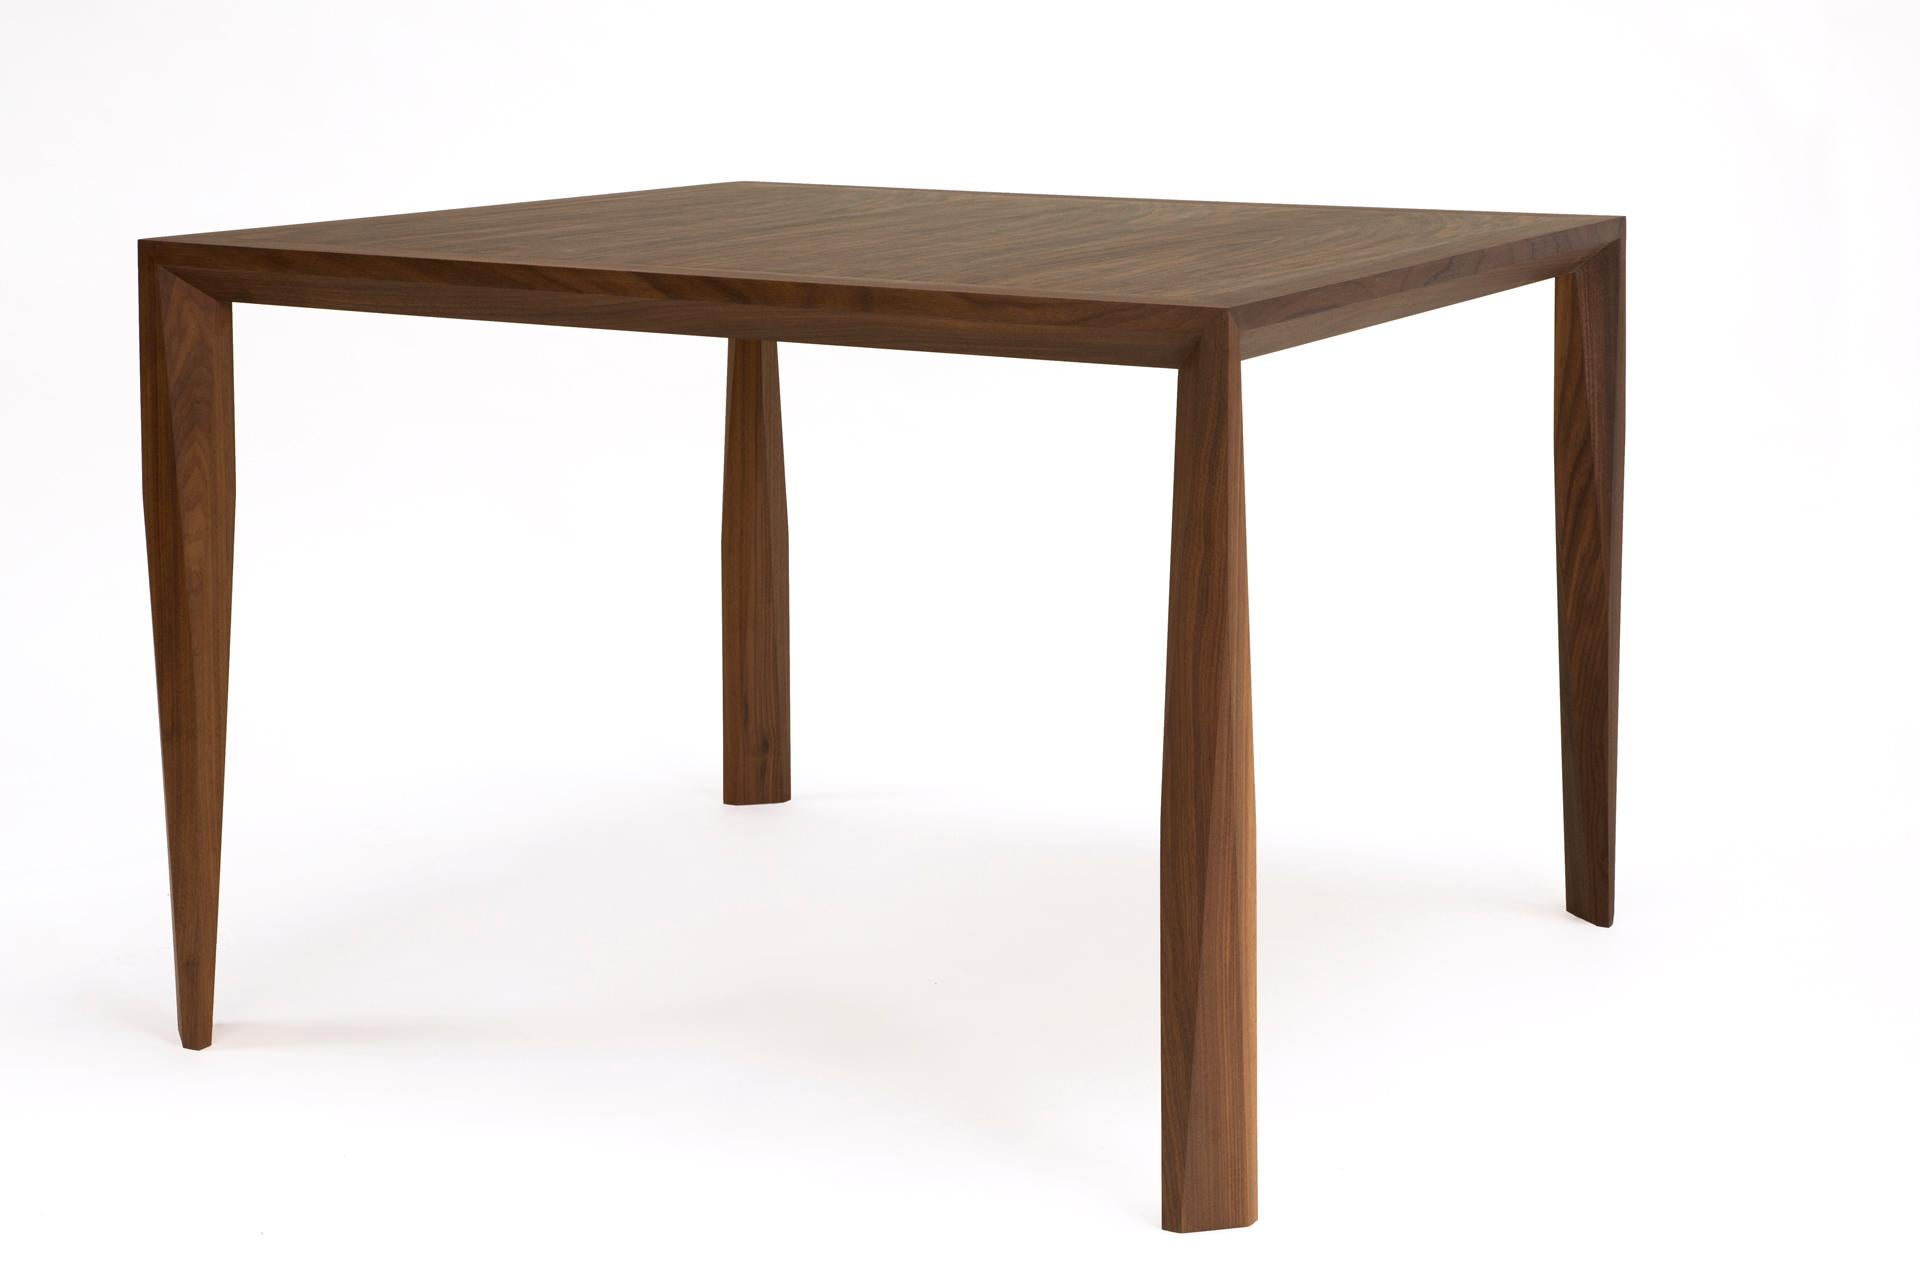 American Modern Wood Dining Table, in Walnut, by Studio DiPaolo For Sale